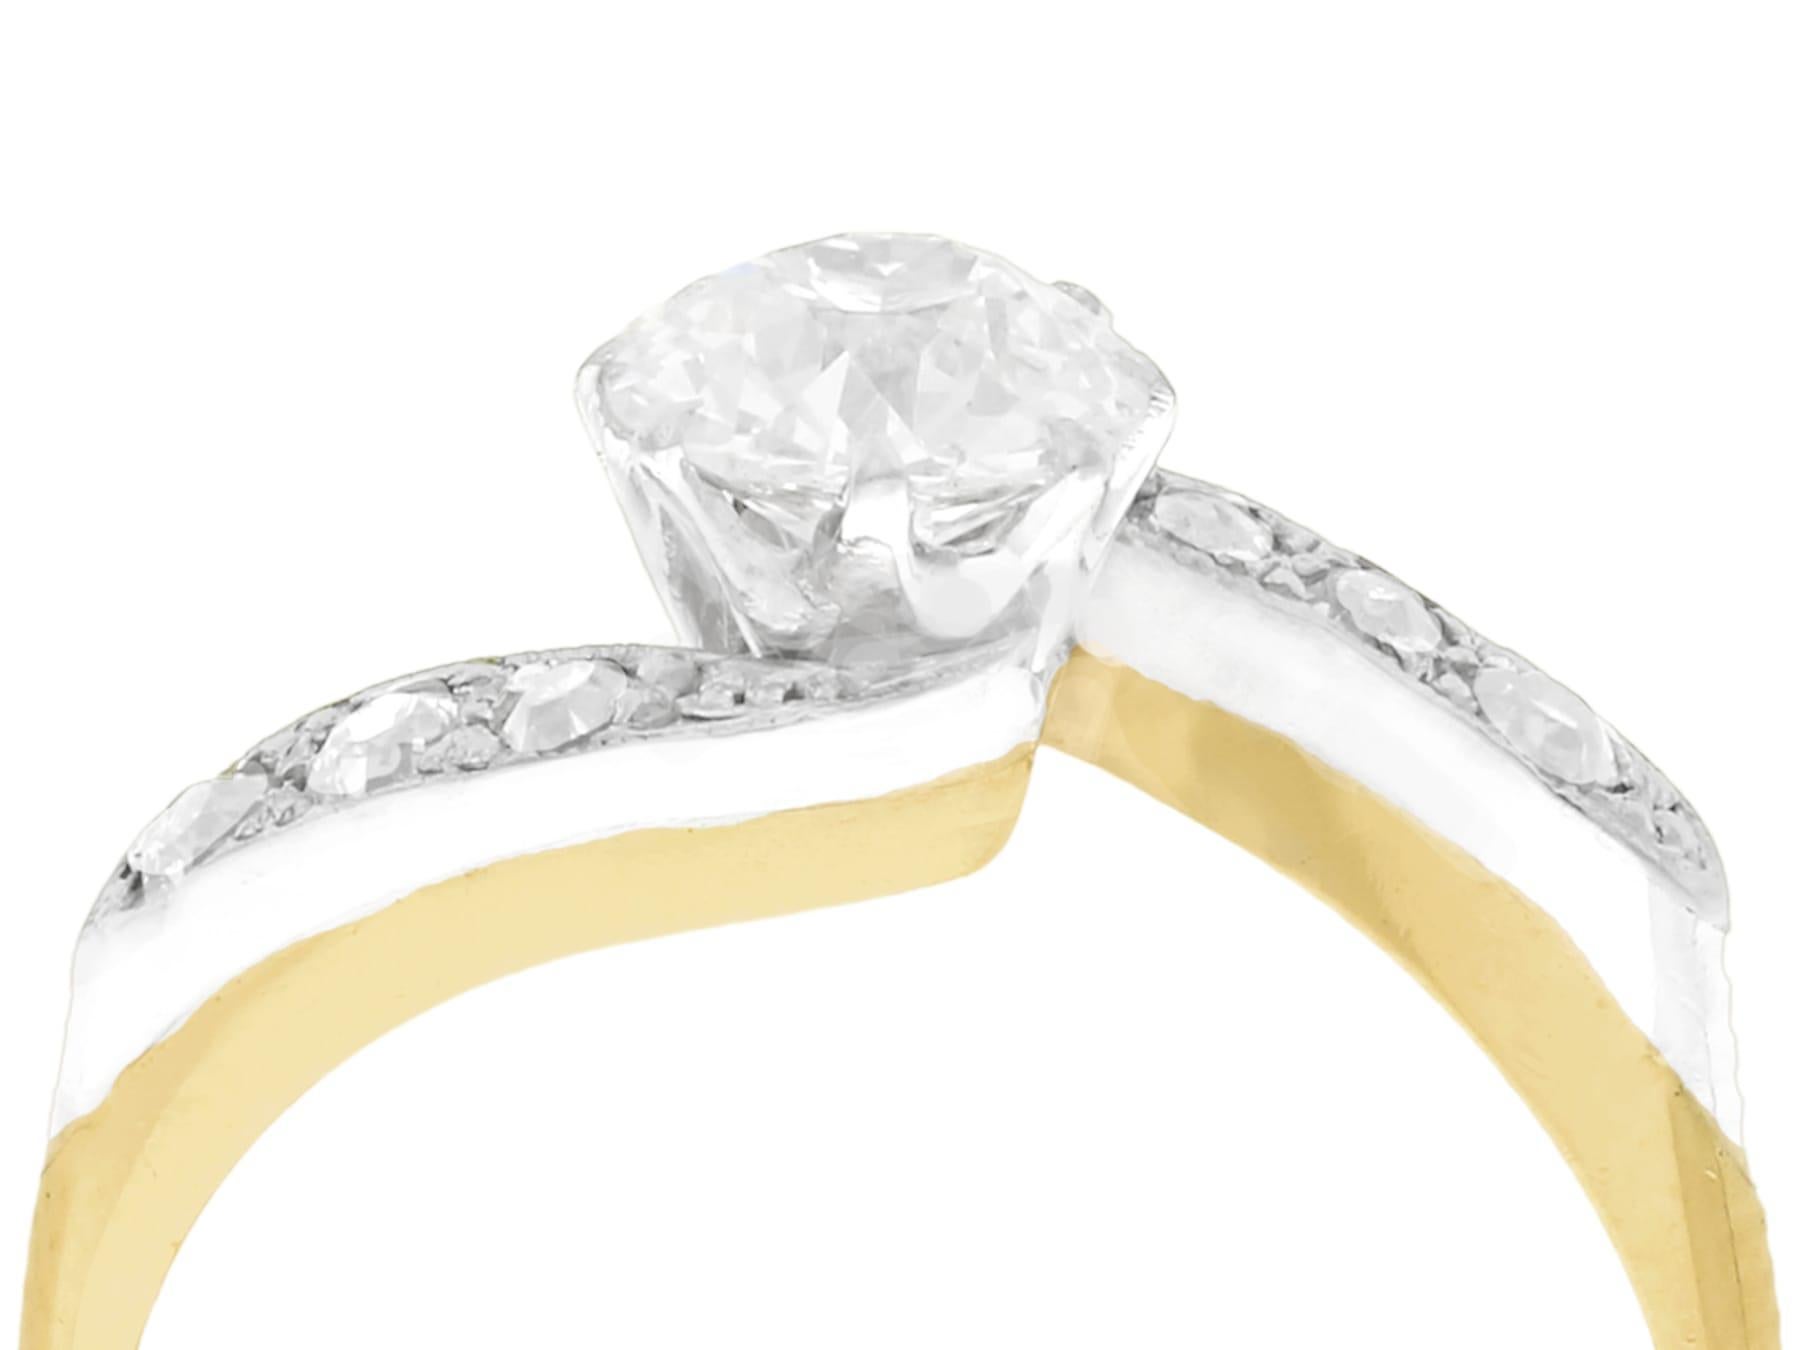 A fine and impressive antique 0.83 carat diamond and 18 karat yellow gold, silver set twist ring; part of our diverse antique jewelry collections.

This fine and impressive antique diamond ring has been crafted in 18k yellow gold with a silver